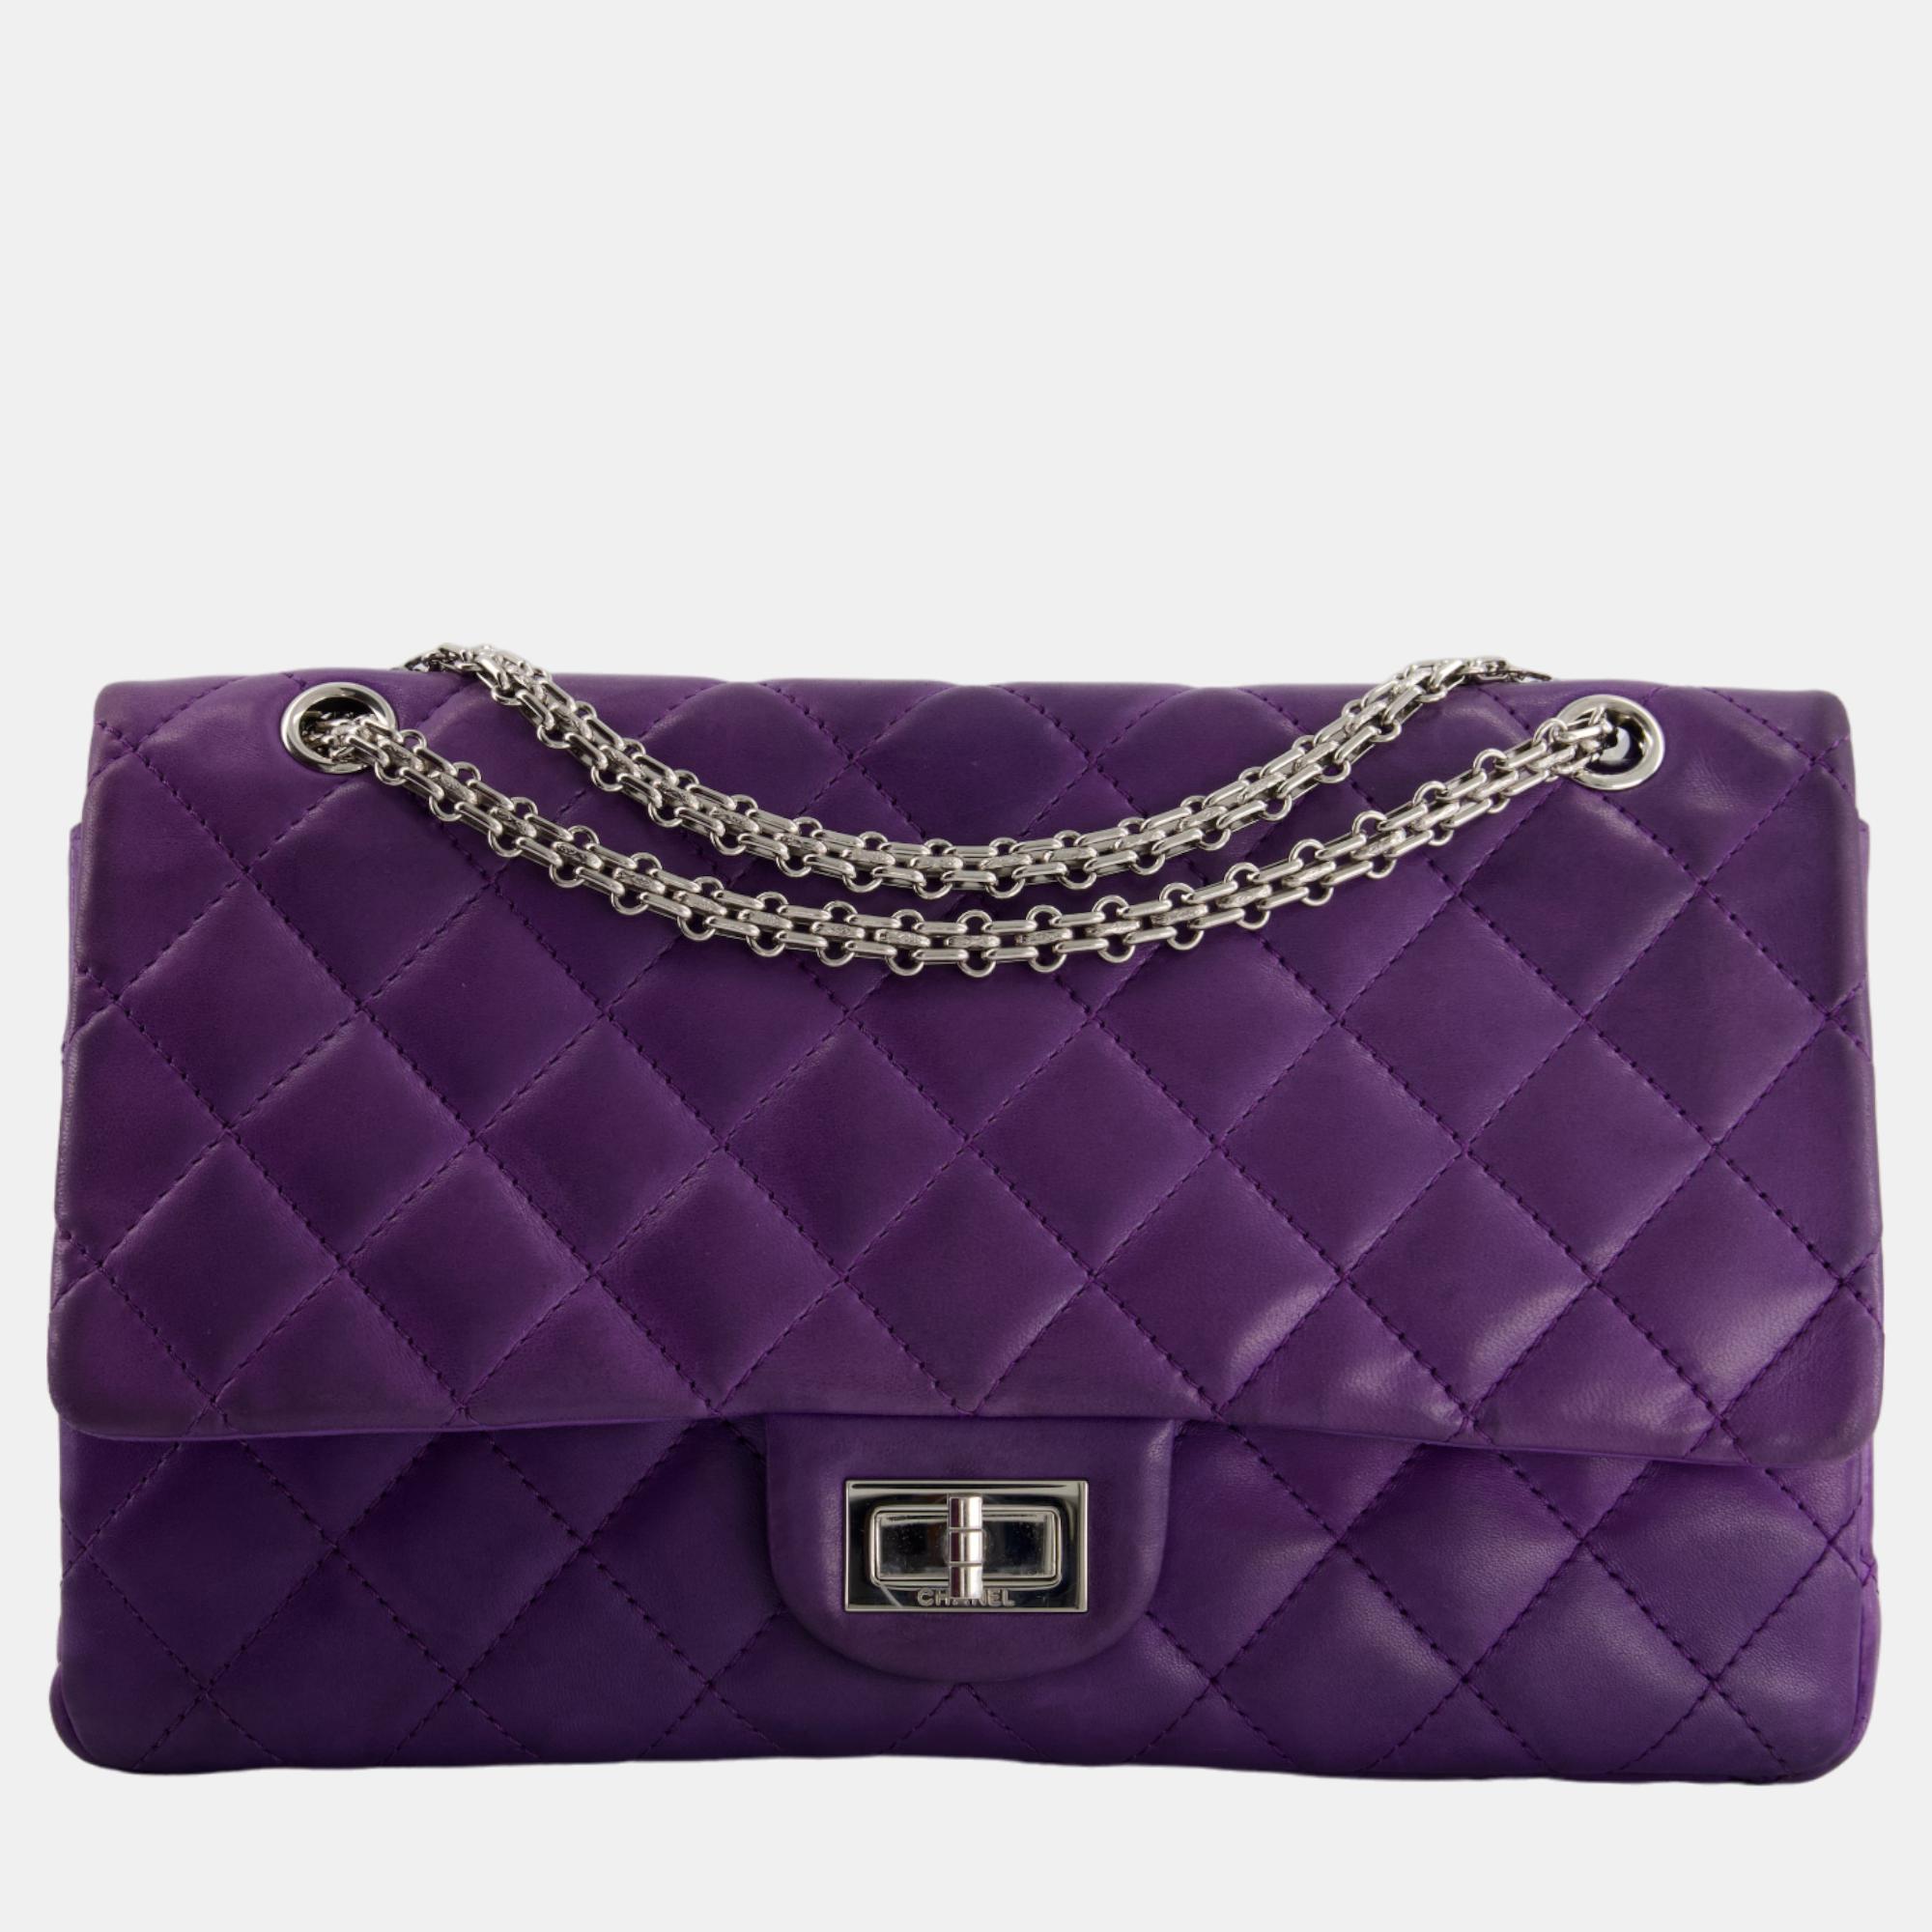 Chanel purple jumbo 2.55 reissue bag in lambskin leather with silver hardware